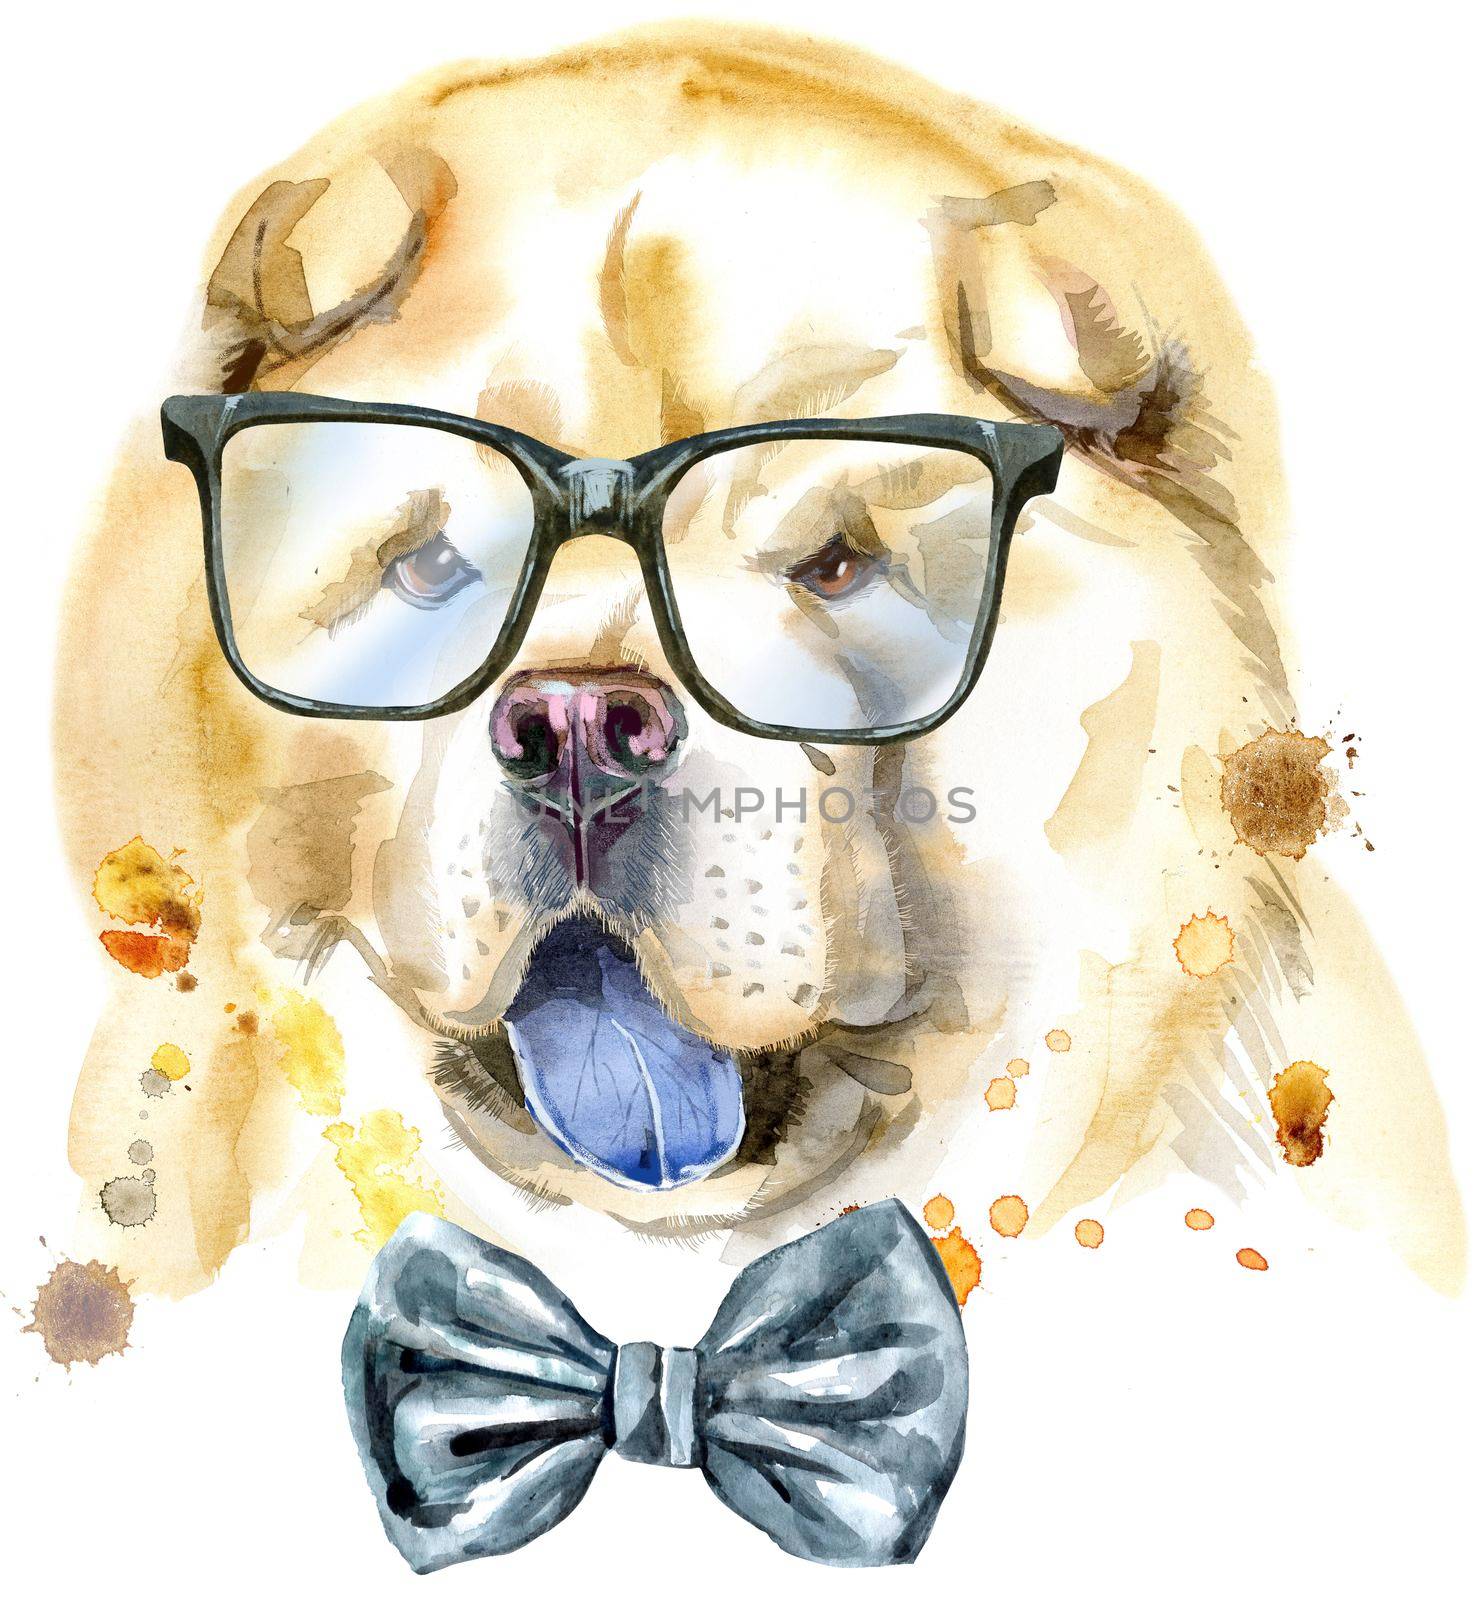 Cute Dog with bow-tie and glasses. Dog T-shirt graphics. watercolor chow-chow dog illustration